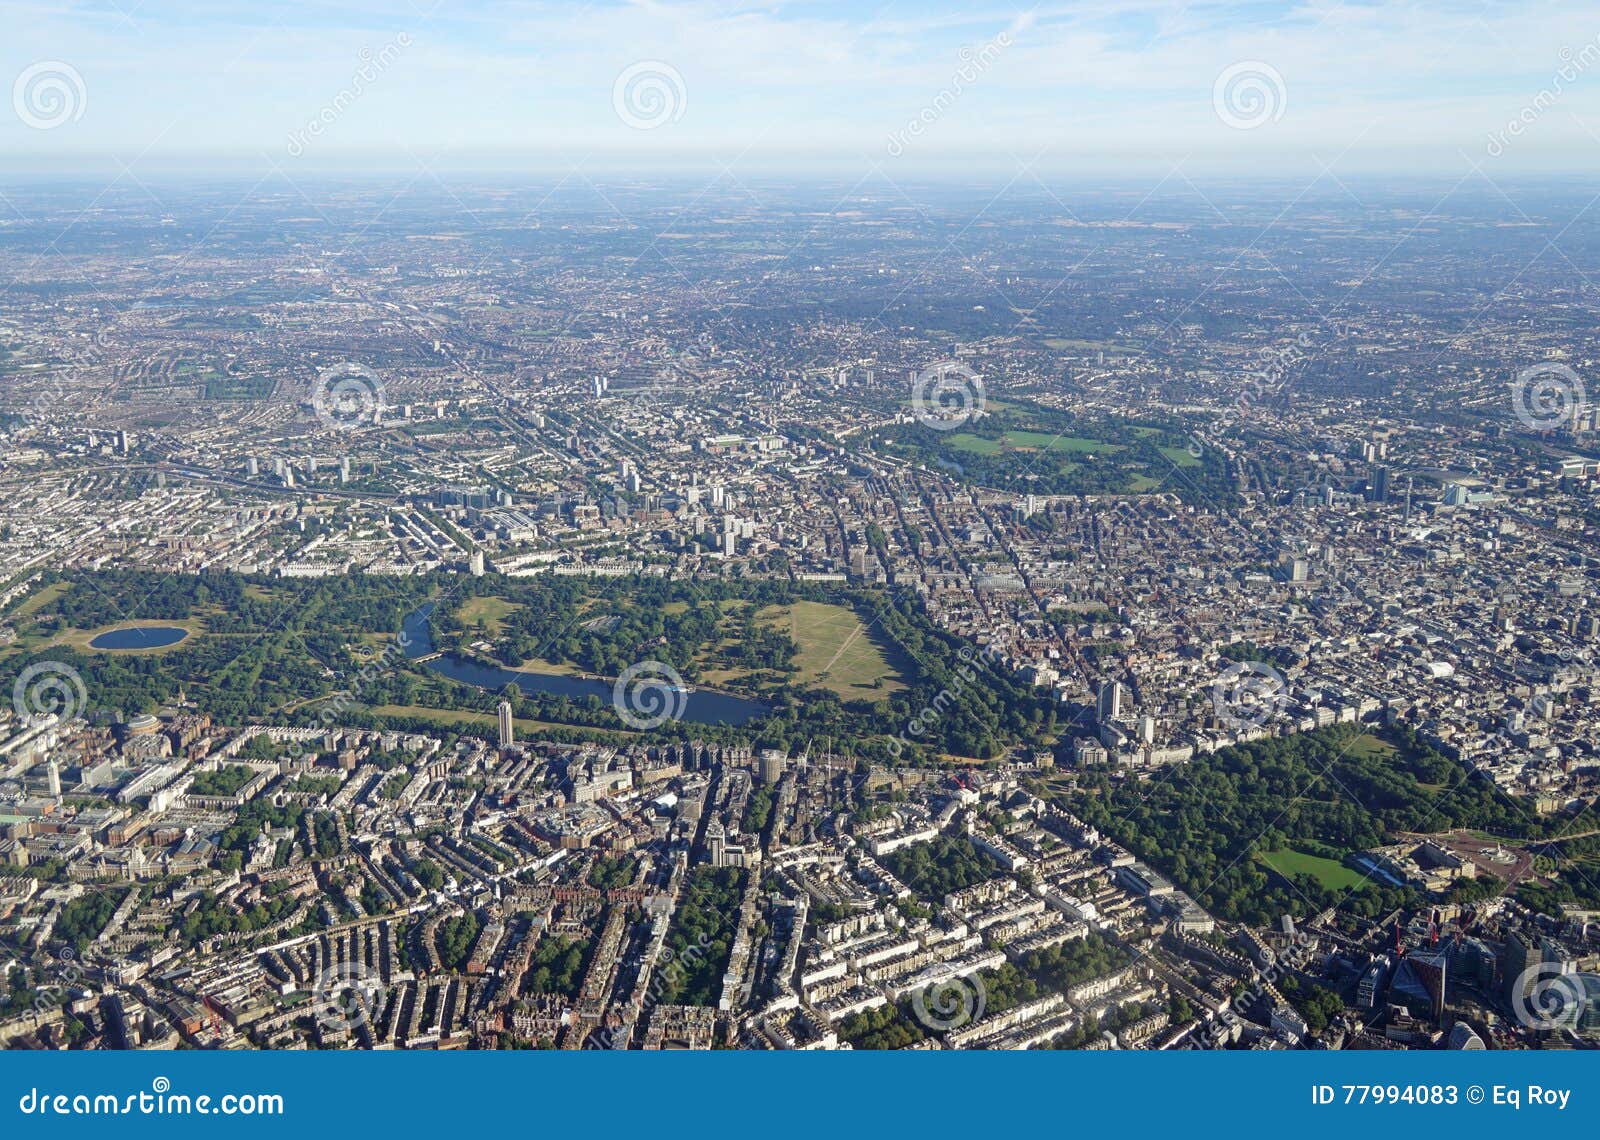 aerial view of central london and hyde park